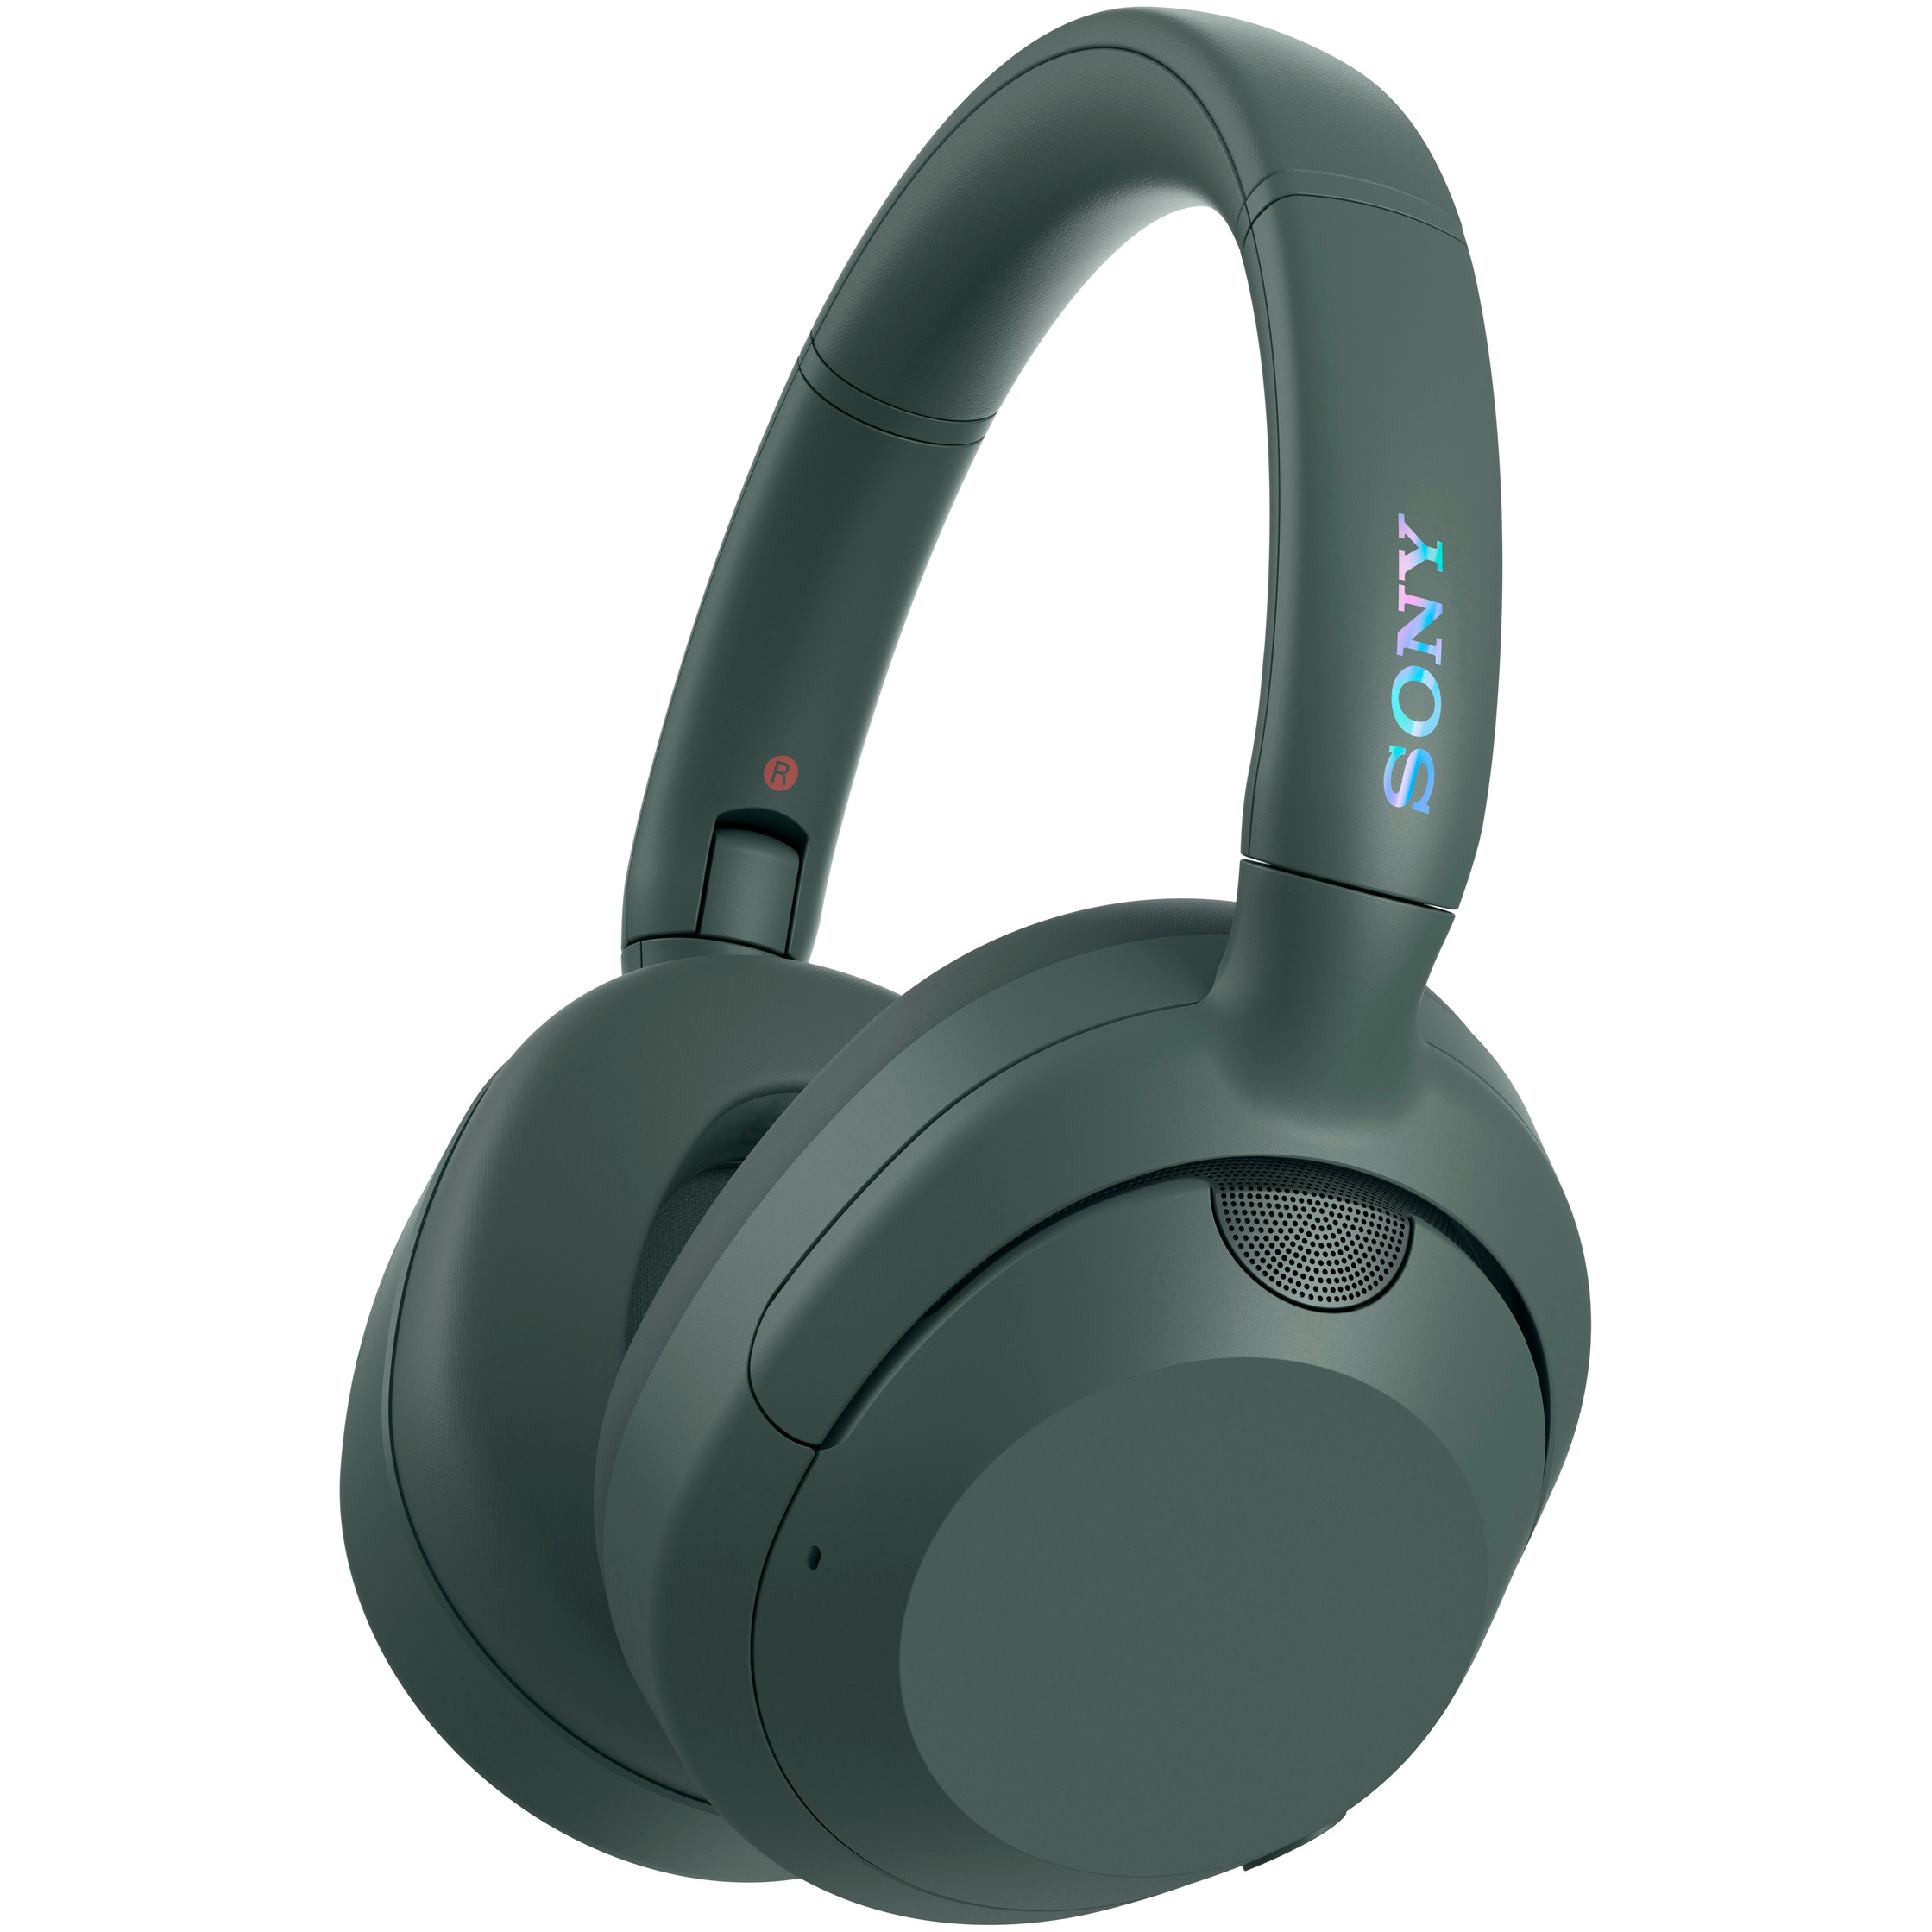 Навушники Bluetooth Sony Over-ear ULT WEAR Forest Gray (WHULT900NH.CE7)фото1